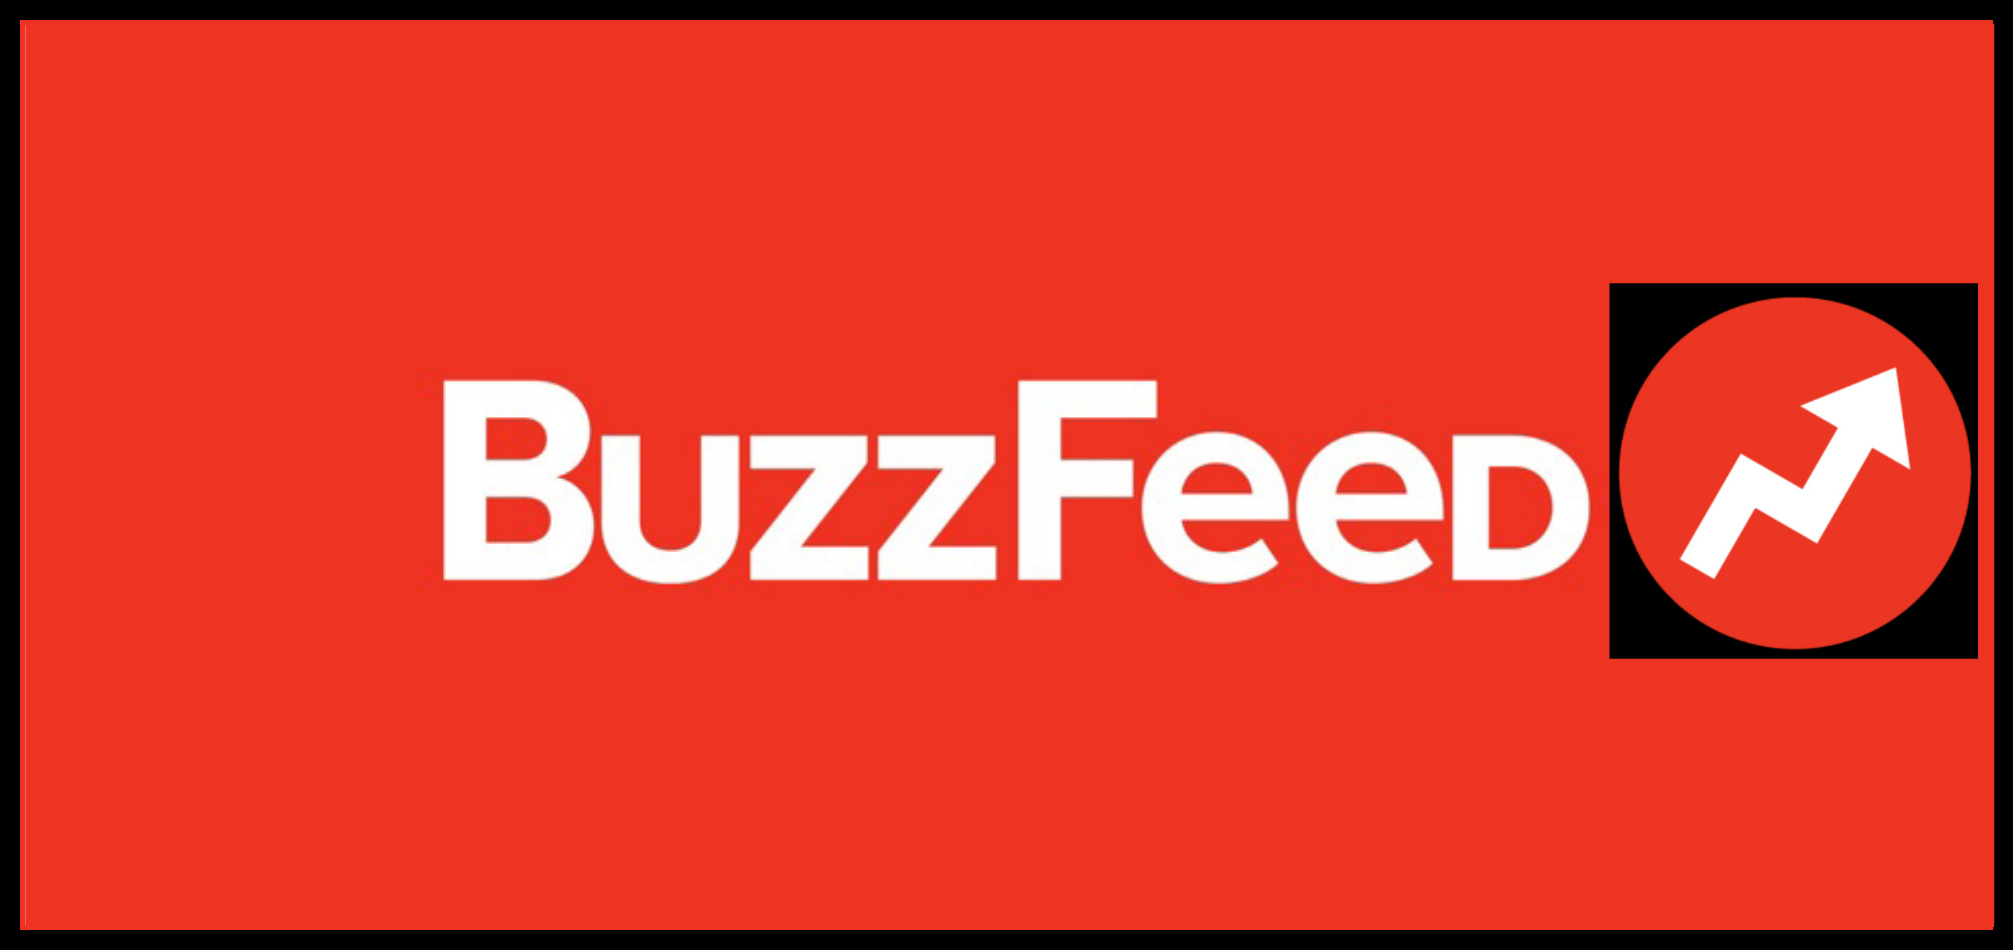 The evolution of buzzfeed